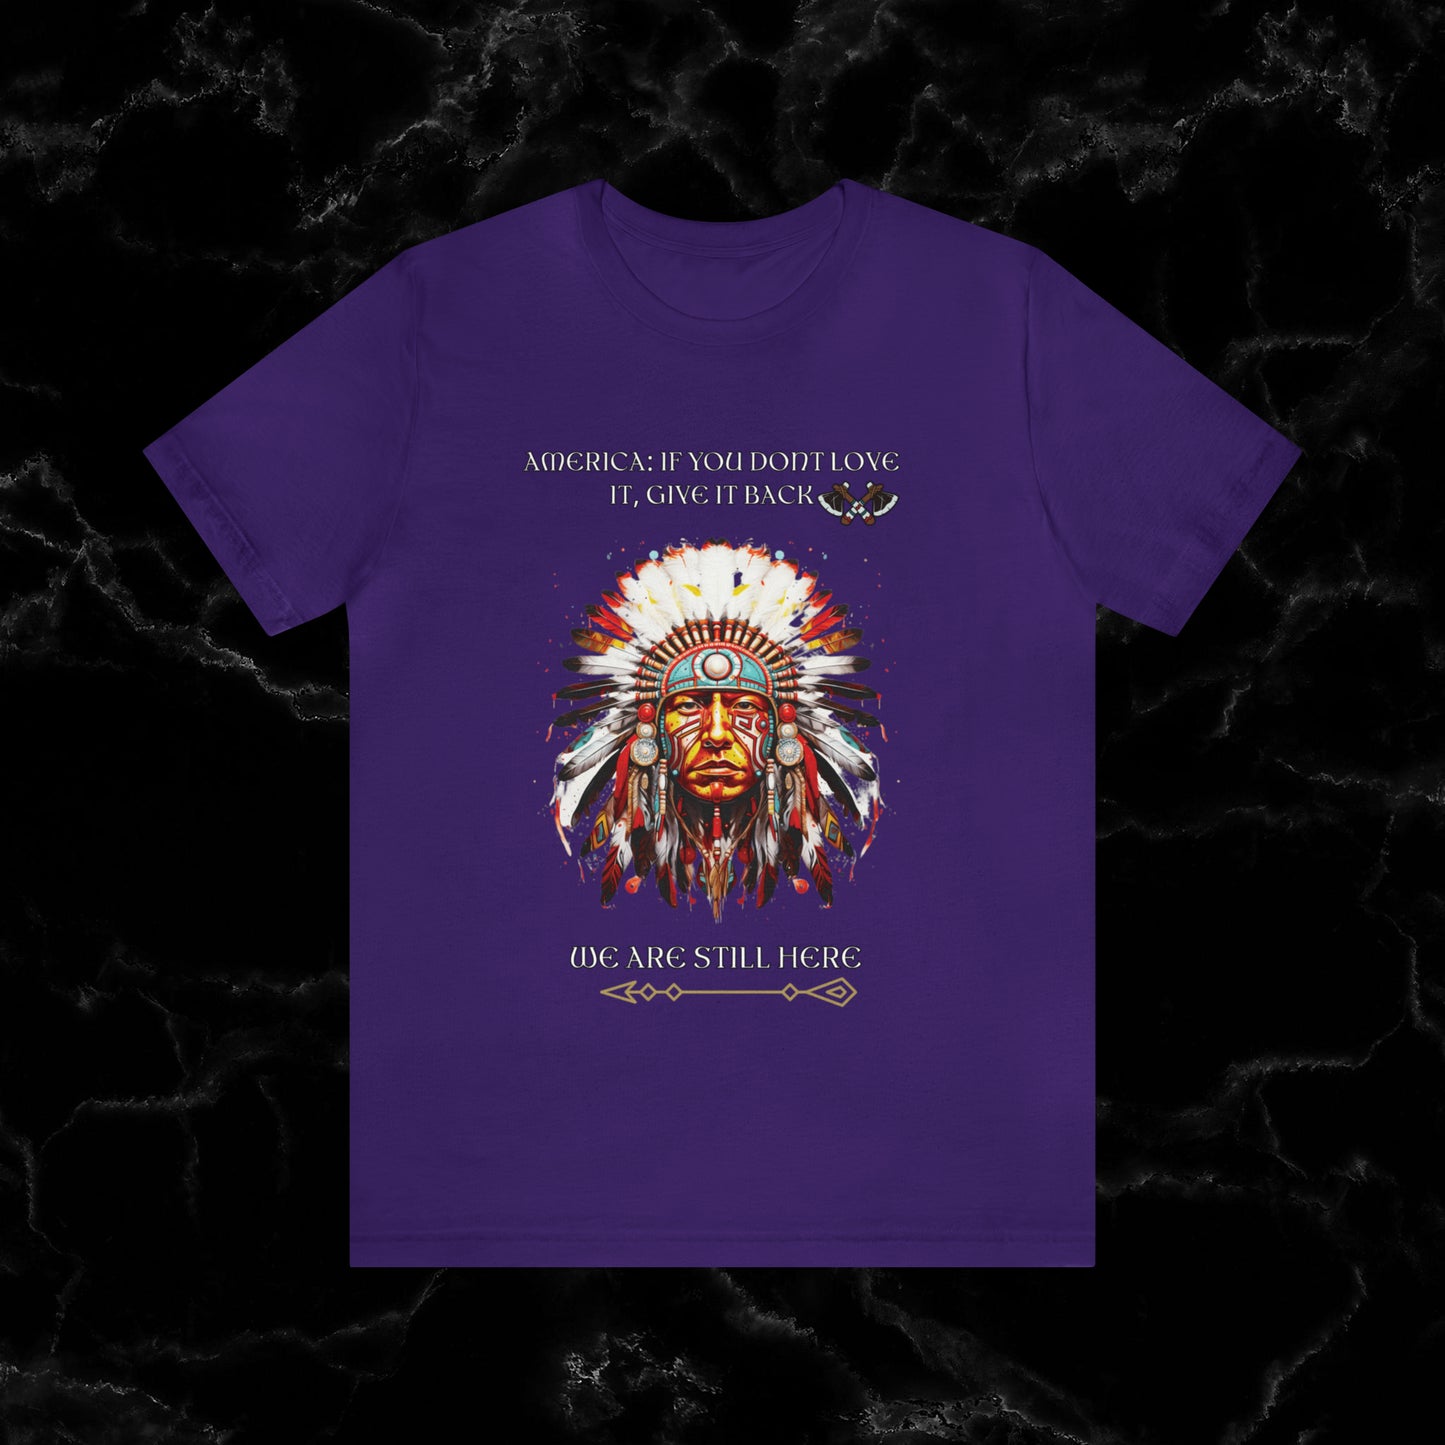 America Love it Or Give It Back Vintage T-Shirt - Indigenous Native Shirt T-Shirt Team Purple S 